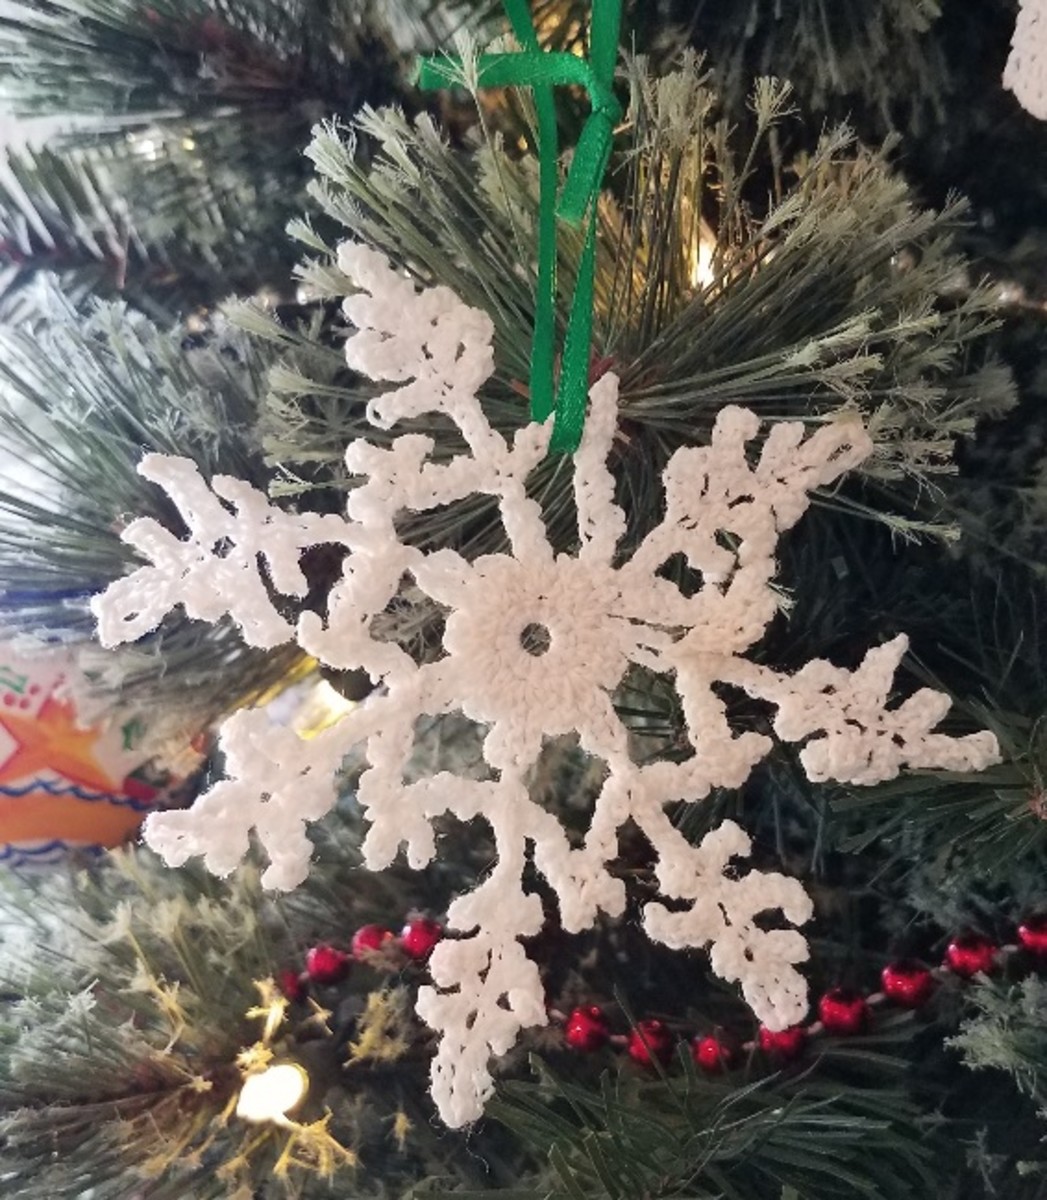 Doily snowflakes are a fun, messy craft.